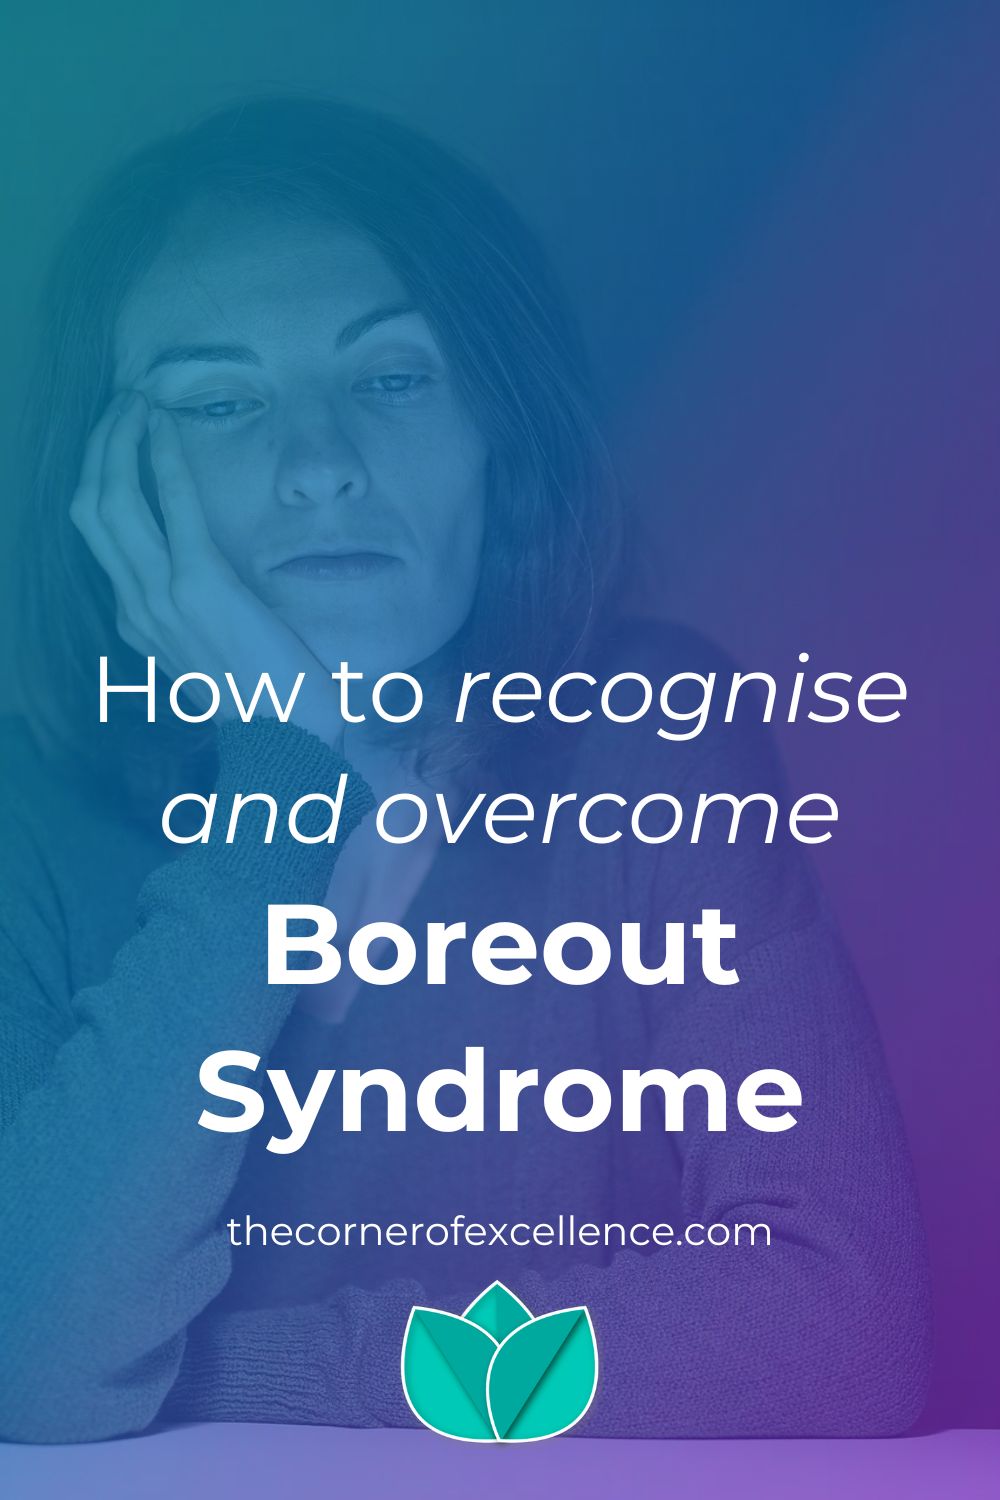 recognise boreout syndrome overcome boreout syndrome boredom disinterest underchallenged apathy bored woman